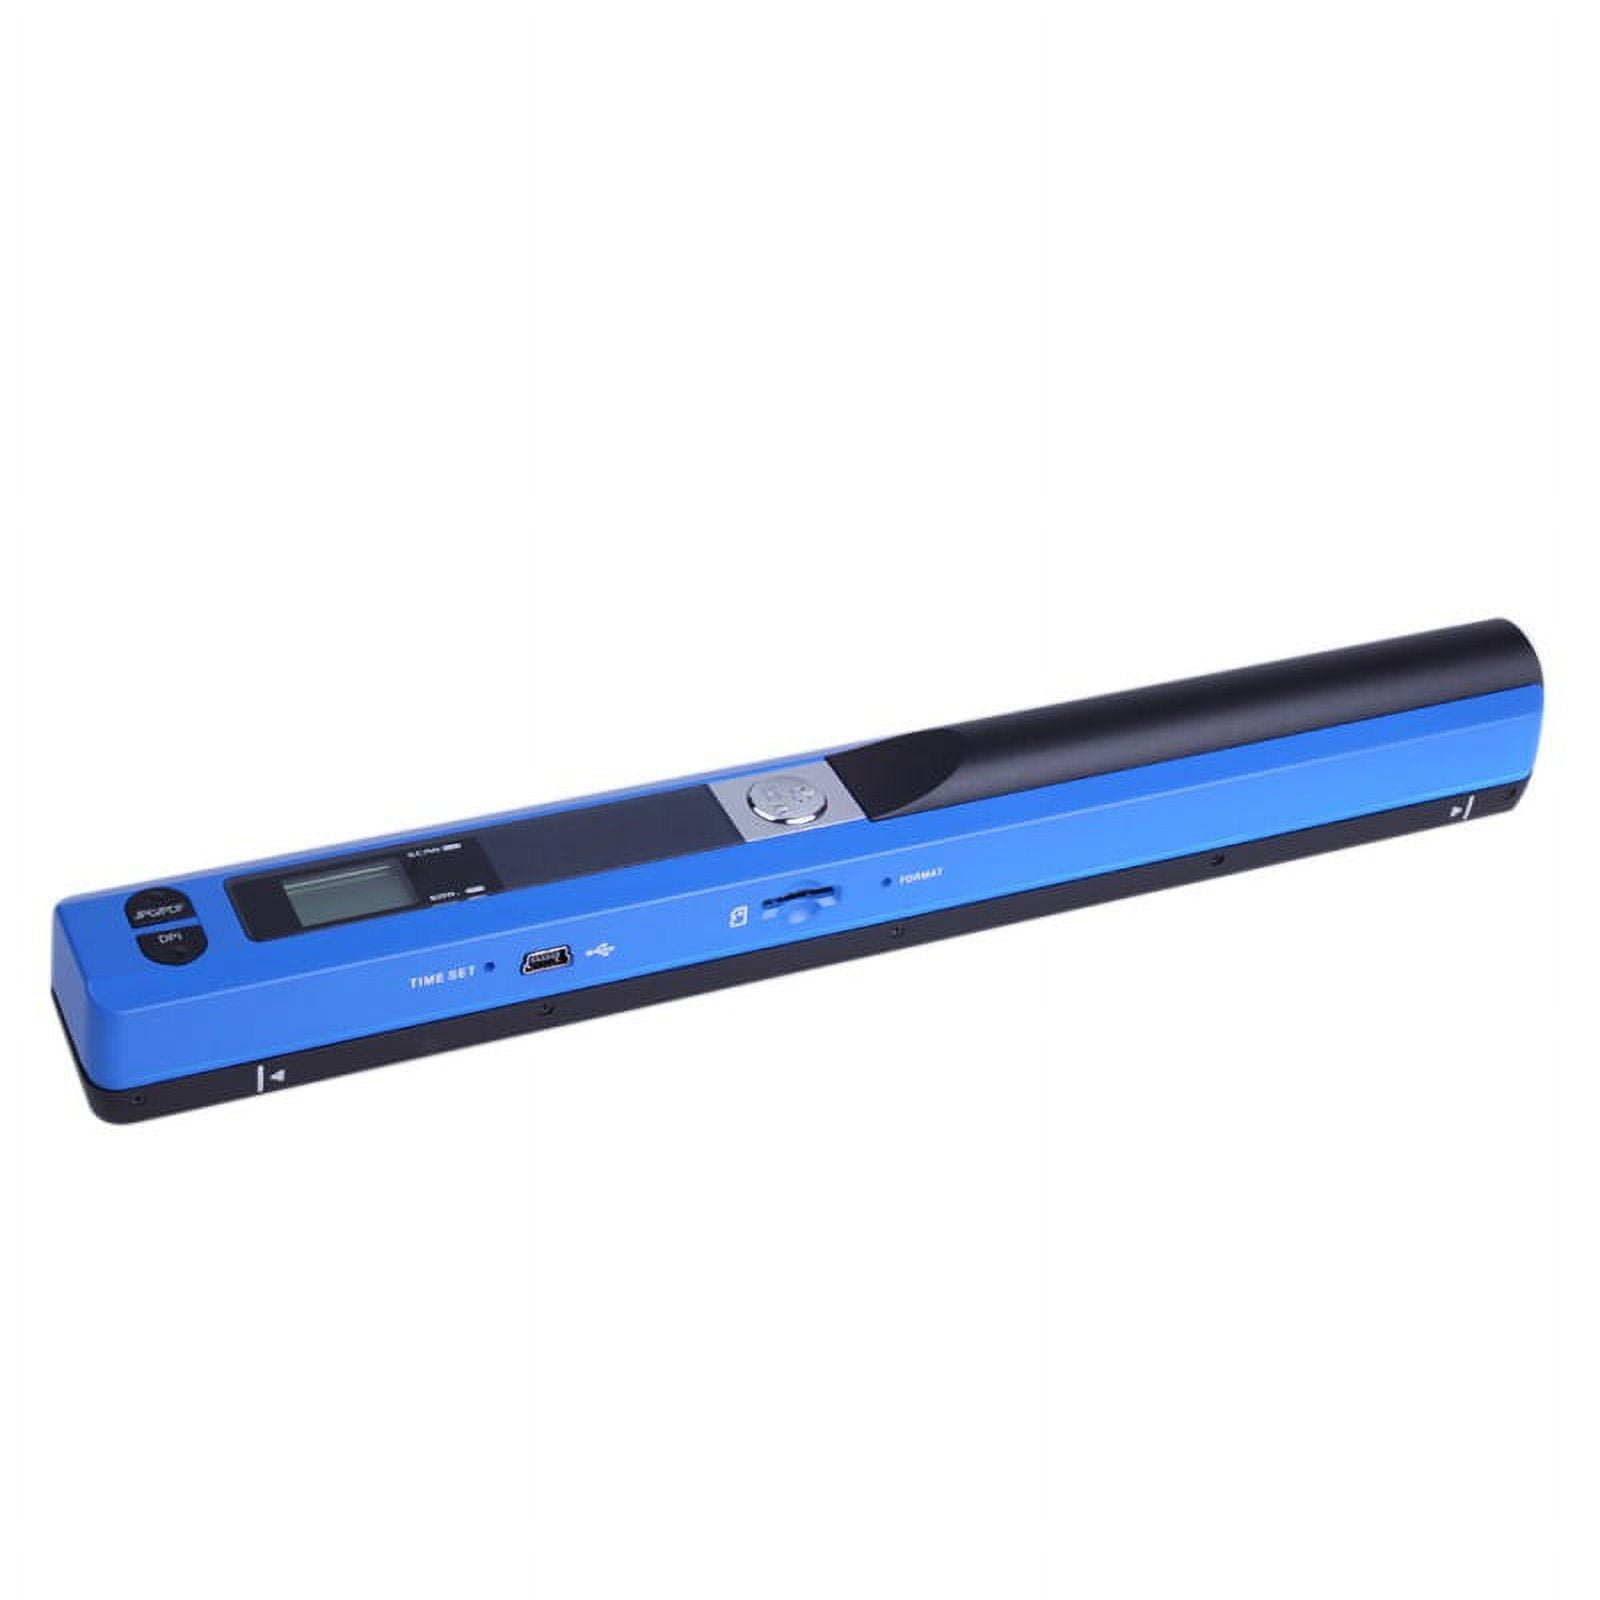 MUNBYN Portable Scanner, Photo Scanner for A4 Documents Pictures Pages  Texts in 900 DPI, Flat Scanning, Include 16G SD Card, Wand Document Scanner